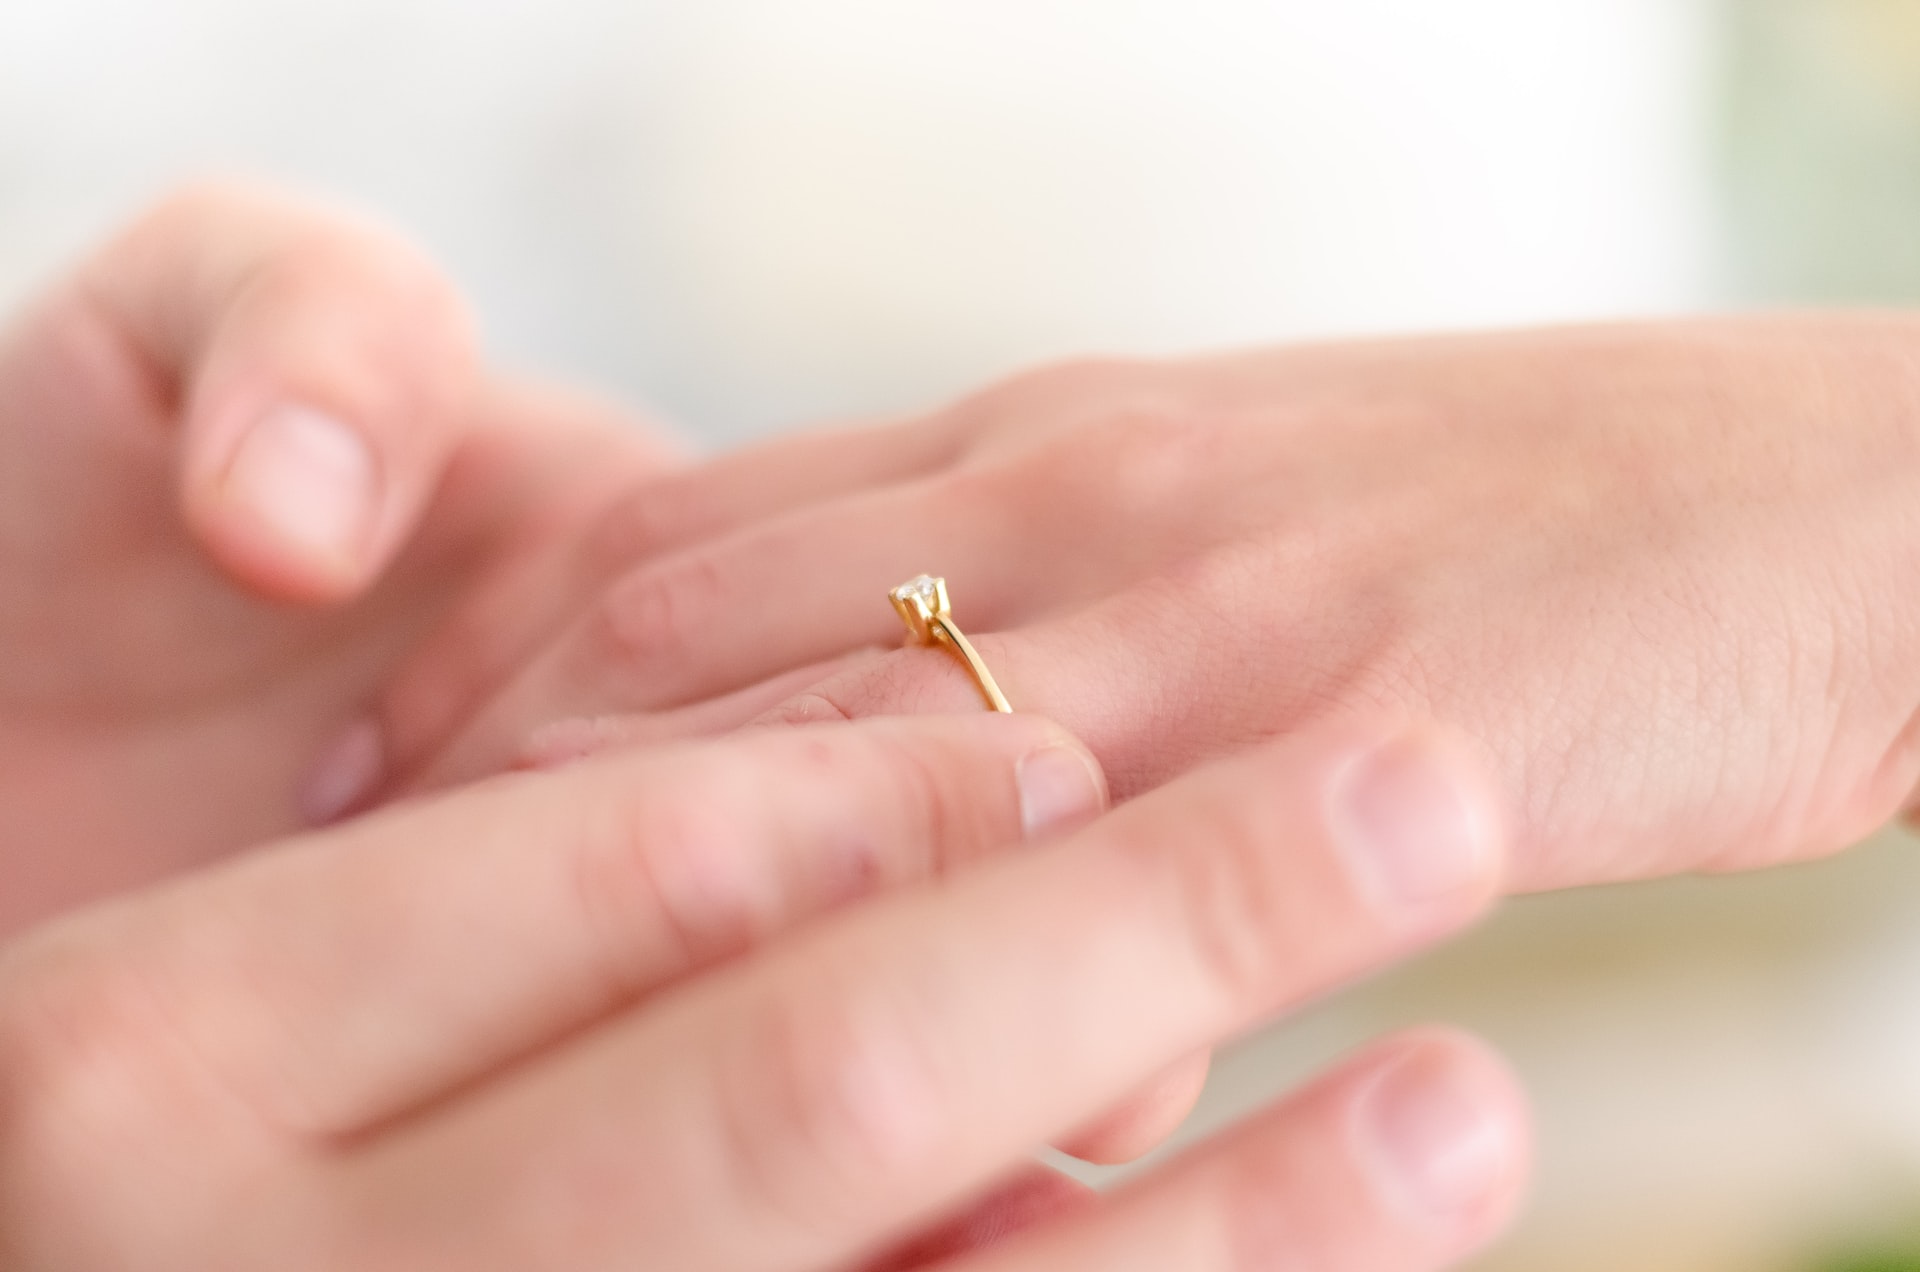 shallow focus photo of person putting gold-colored ring